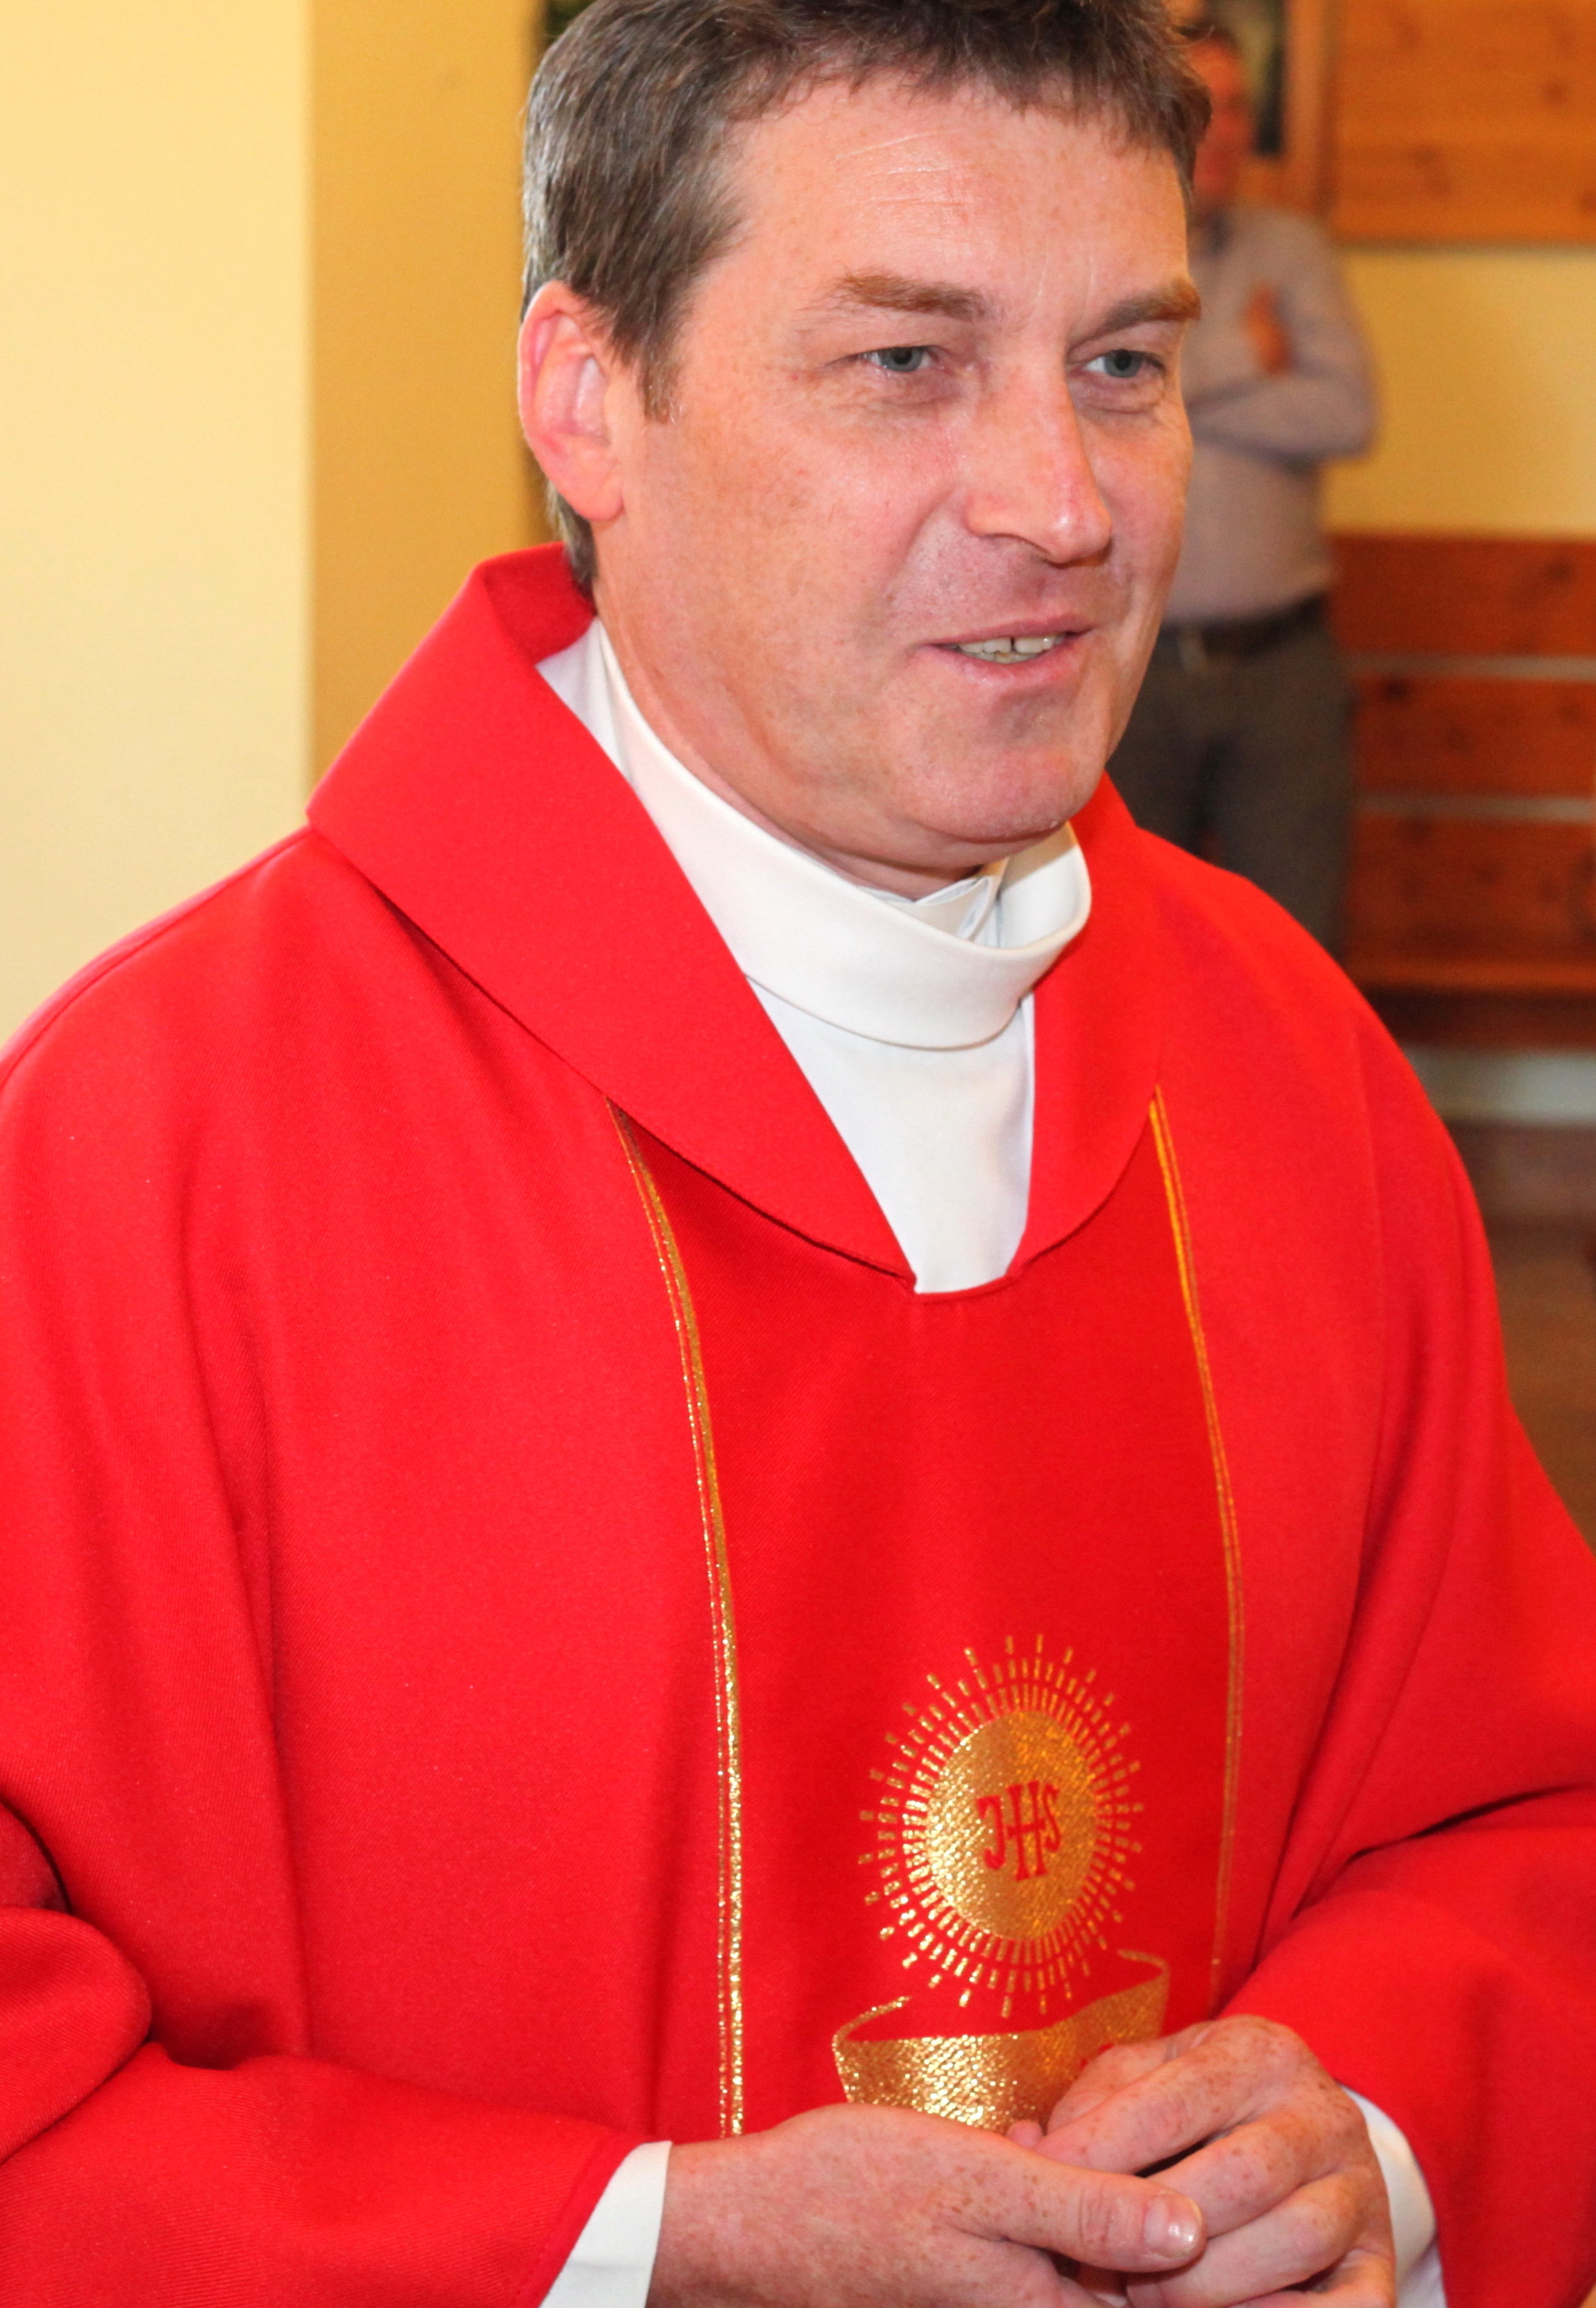 a Catholic priest in a church in May 2013, portrait 2